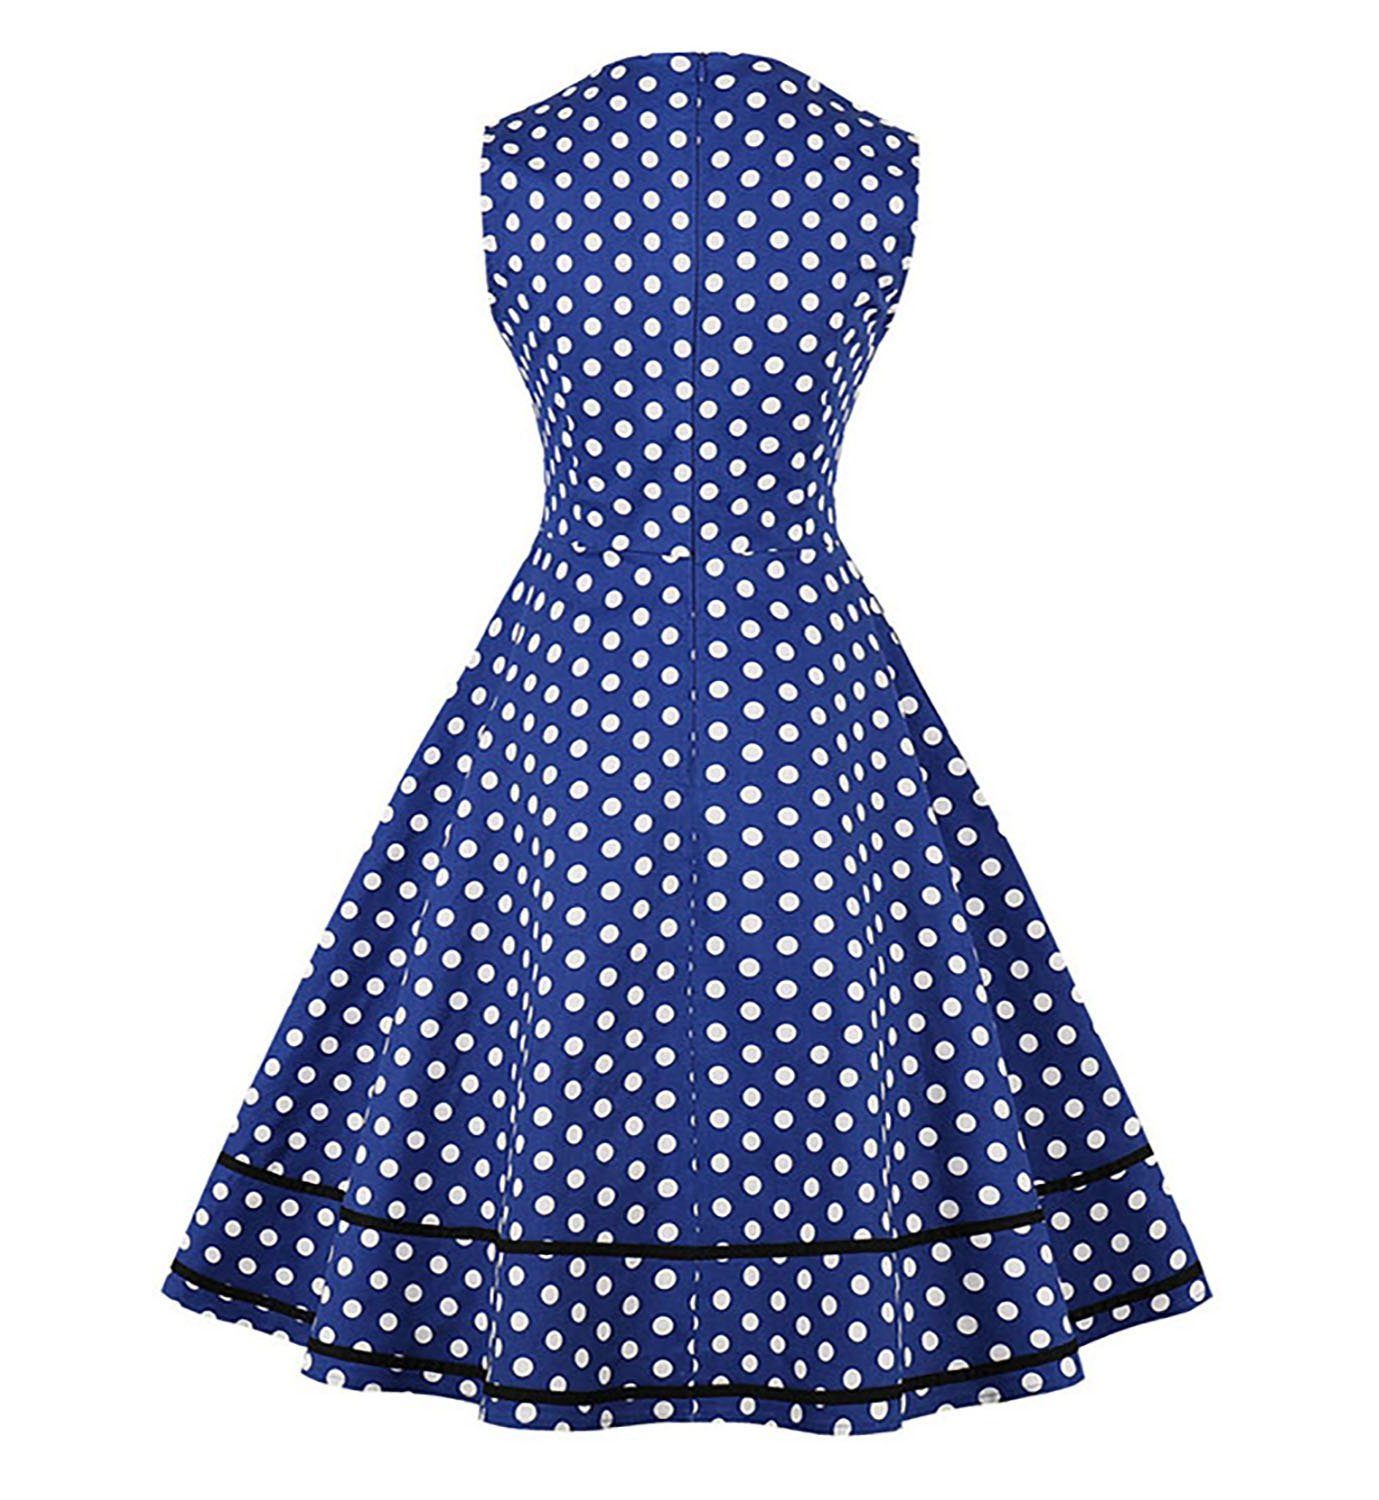 Polka Dot Retro Vintage Style Cocktail Party Swing Dress – VINTAGEPOST